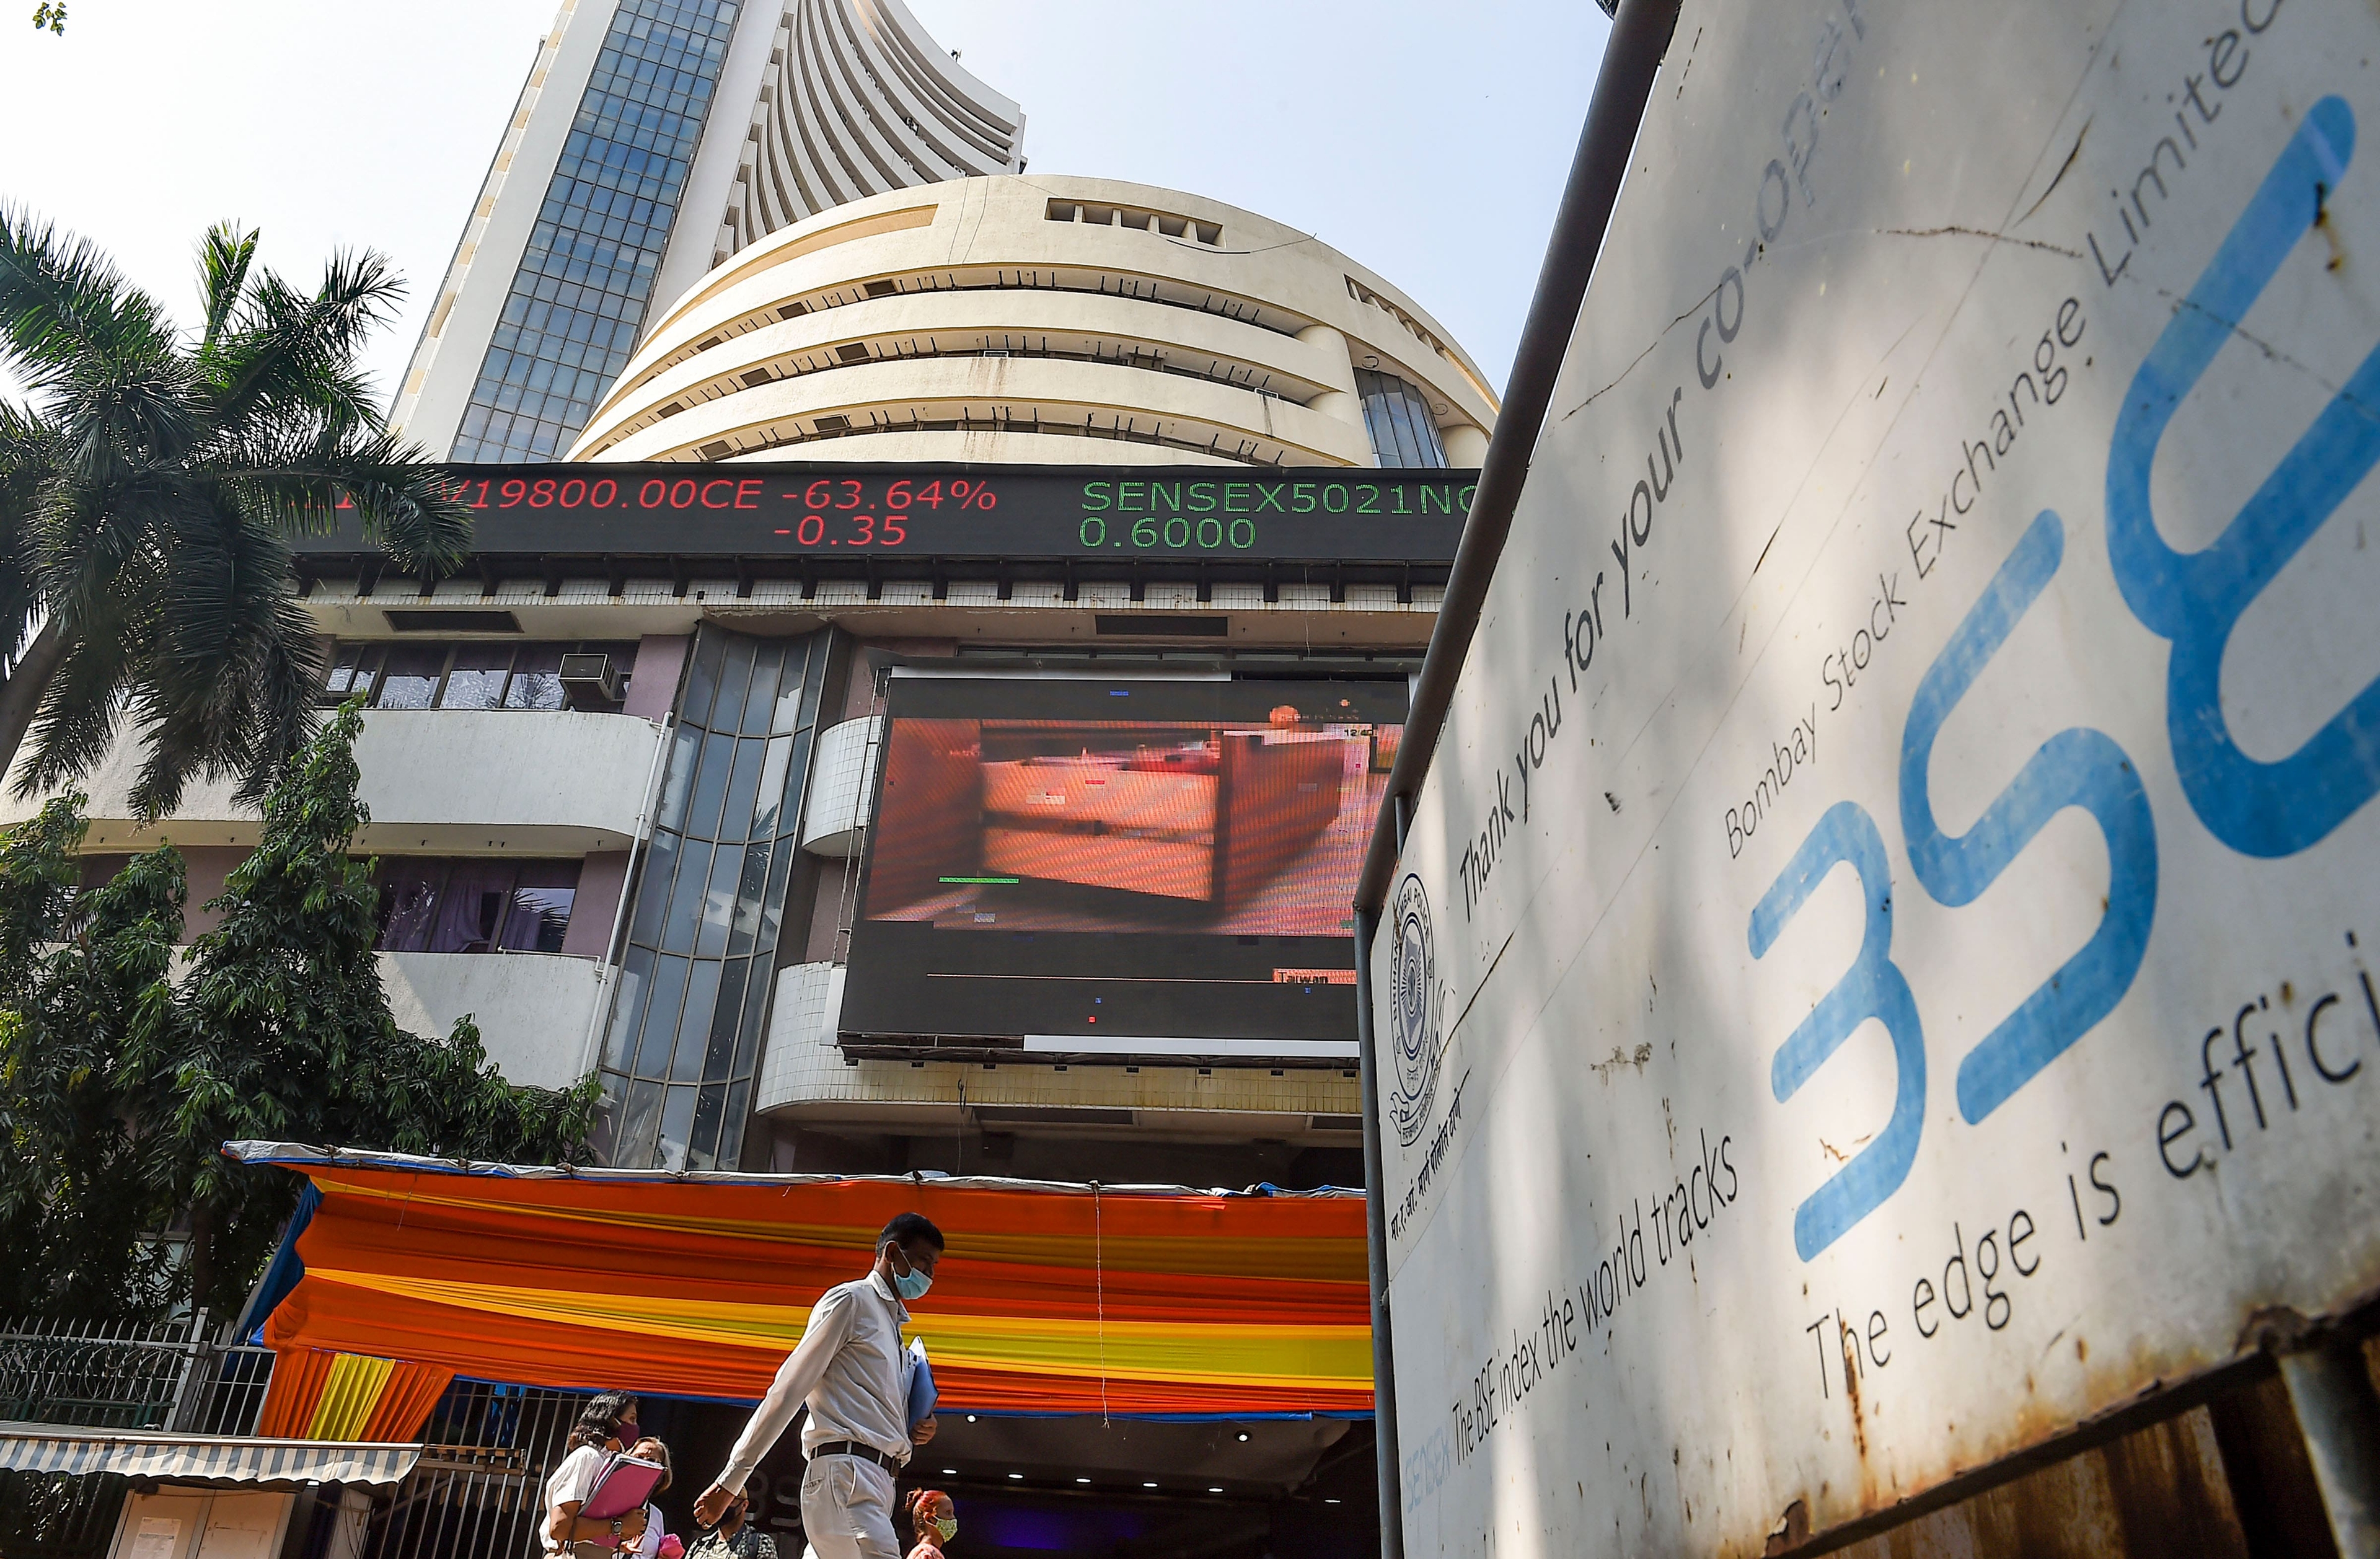 Headline indices the Sensex and the Nifty ended in the red for the third consecutive session on March 25 amid mixed global cues and concerns over-stretching Ukraine war. Elevated crude oil prices, concerns over inflation and the looming monetary policy normalisation also kept the mood of the market sombre. The 30-share pack closed 233 points, or 0.41 percent, lower at 57,362.20 while the Nifty settled with a loss of 70 points, or 0.40 percent, at 17,153.